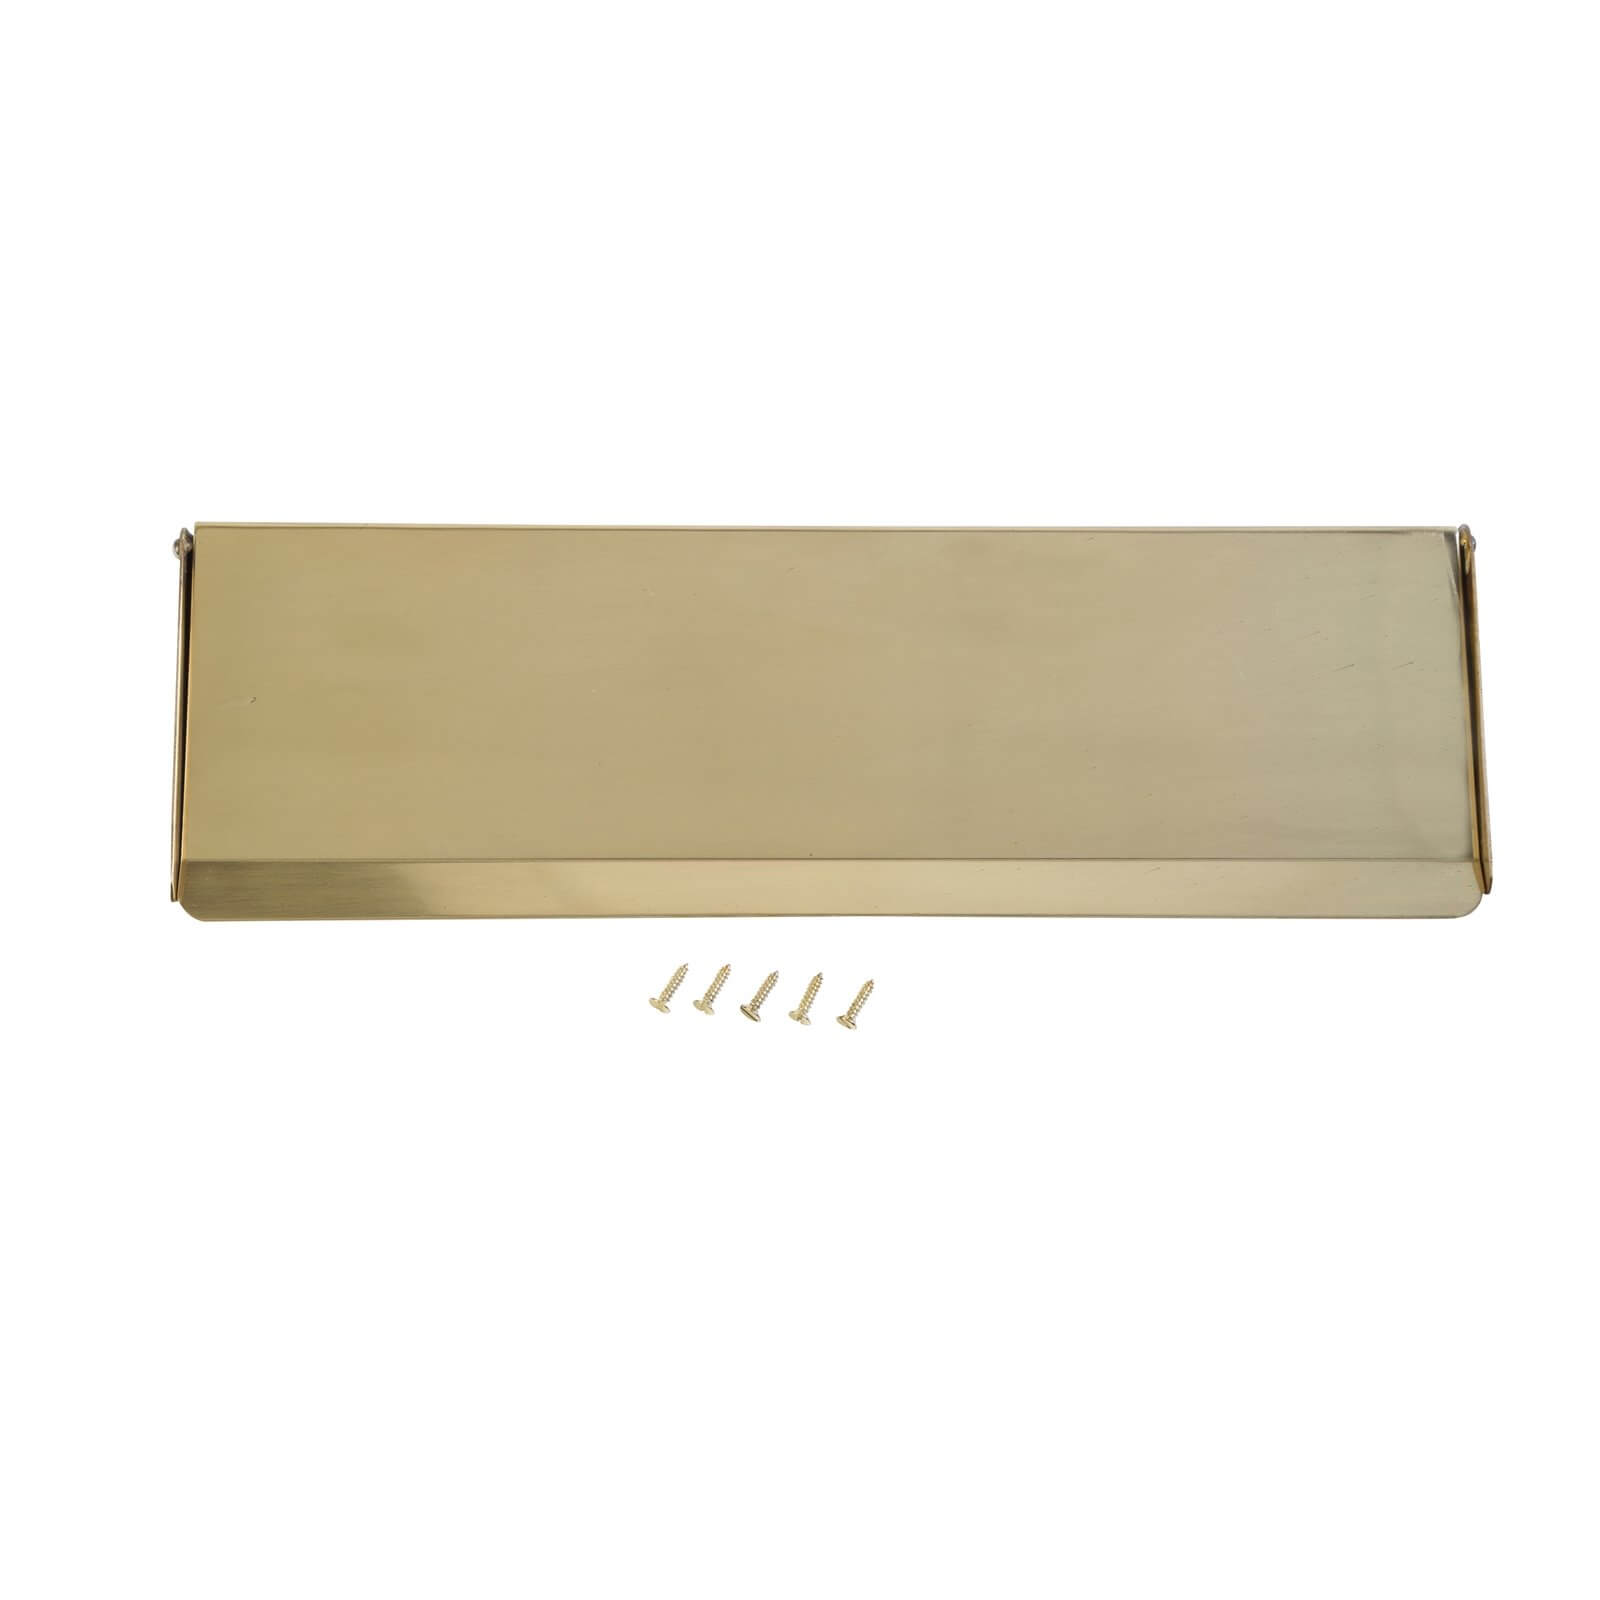 Polished Brass Letter Tidy - 306 x 96mm